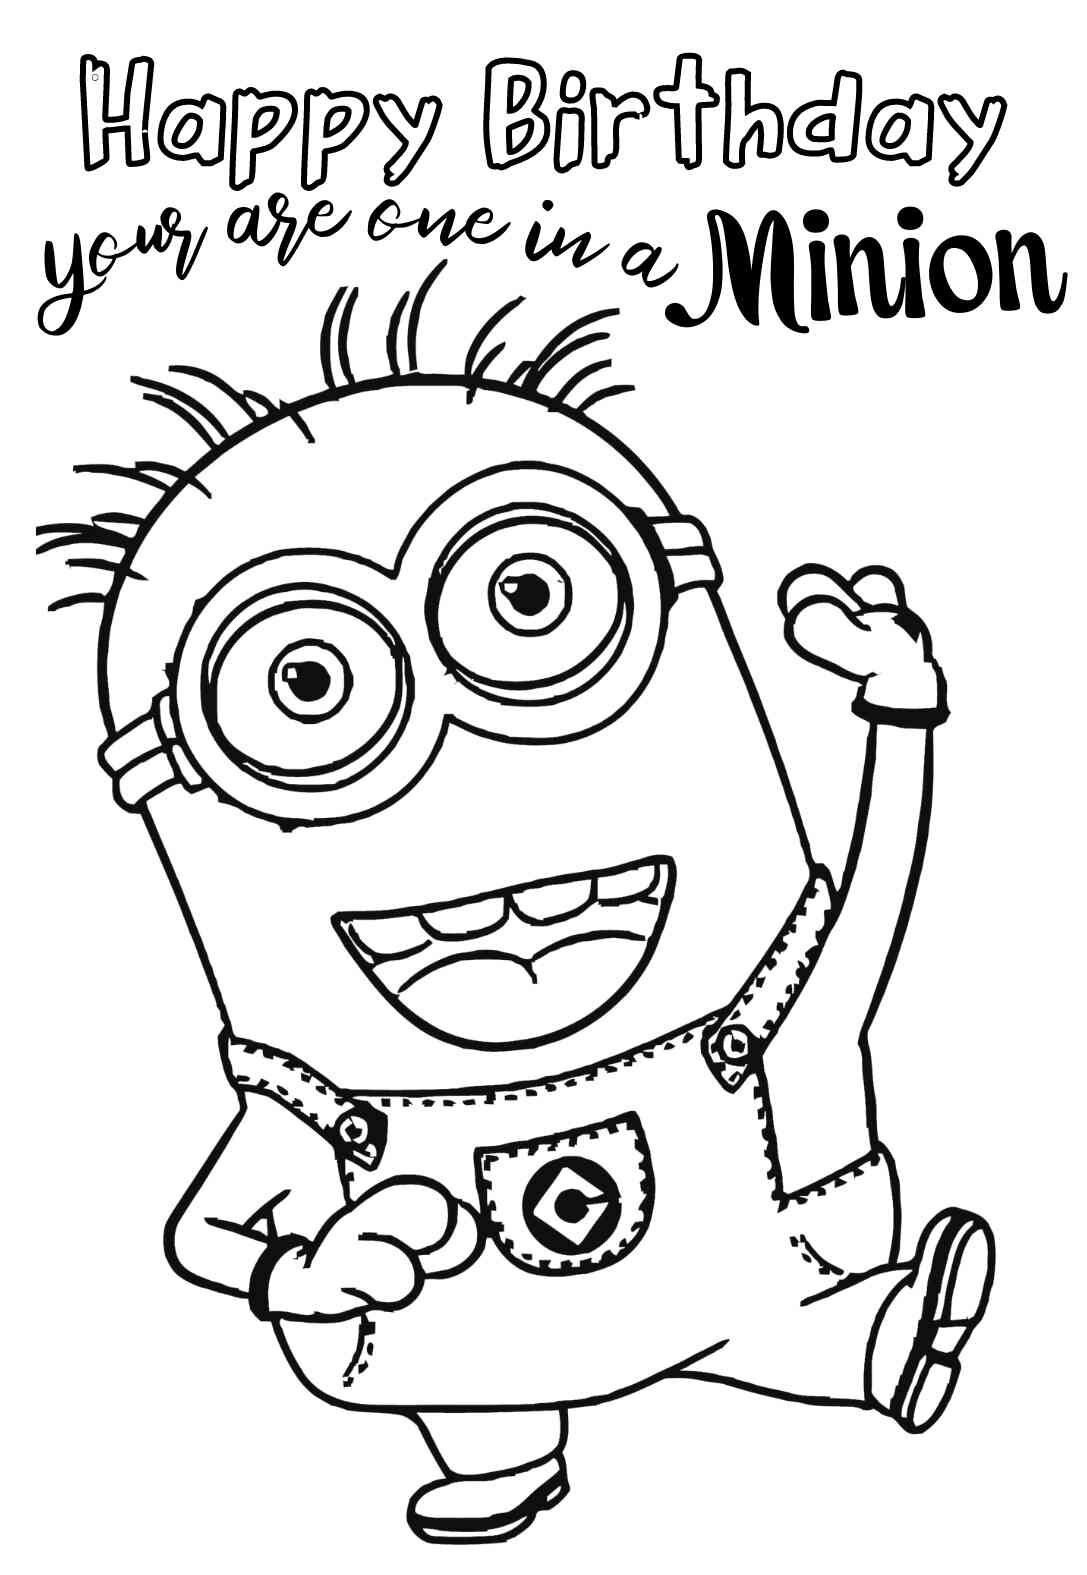 Free Minions Birthday Coloring Pages & Cards — PRINTBIRTHDAY.CARDS